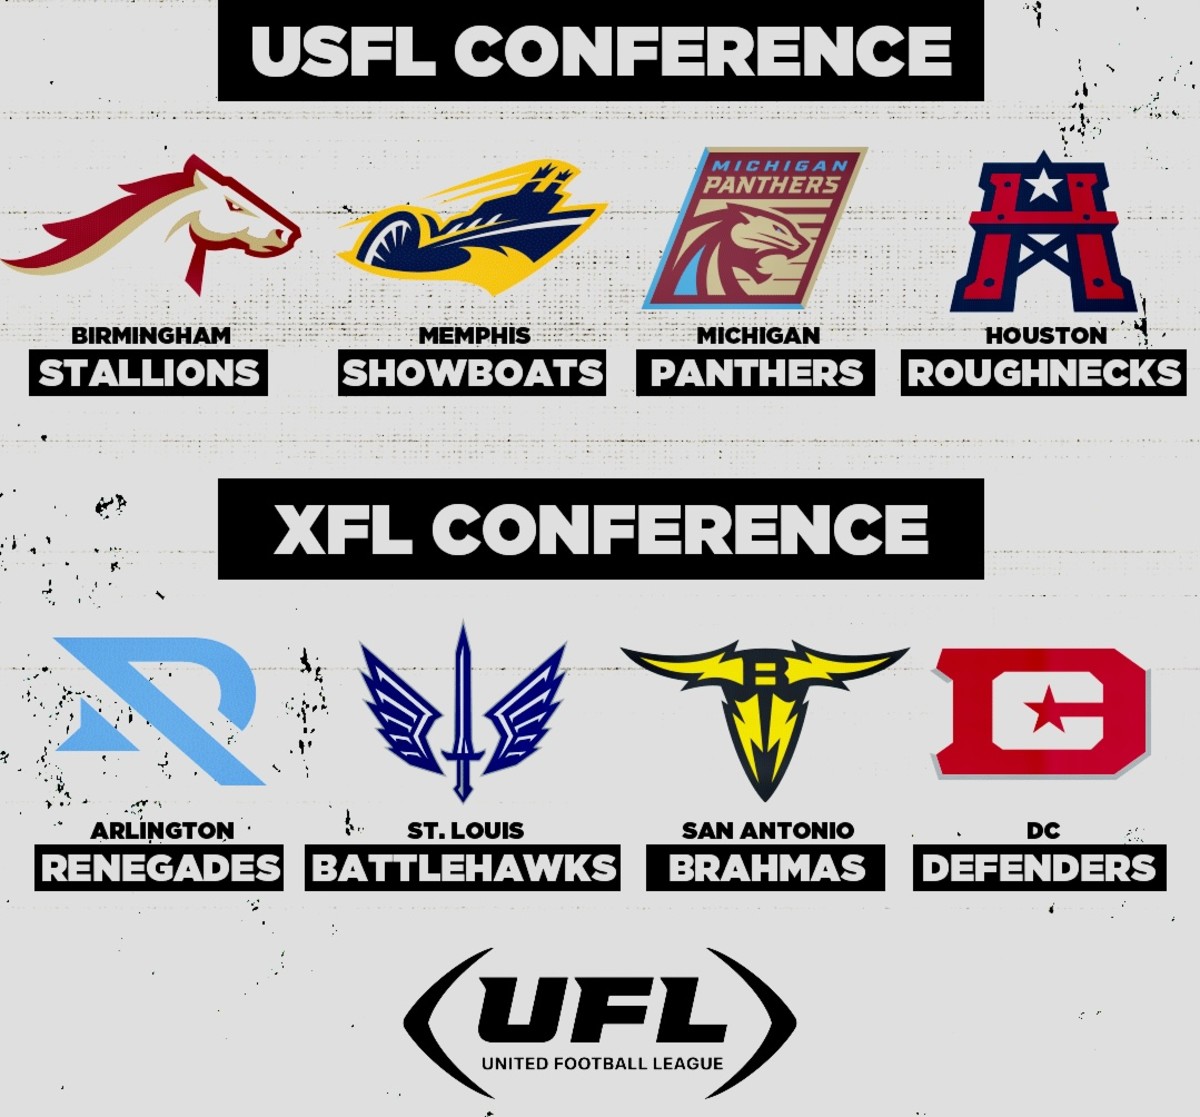 Each team from the USFL Conference will be paired up with the XFL Conference team below it for the duration of training camp ahead of the UFL's inaugural season.